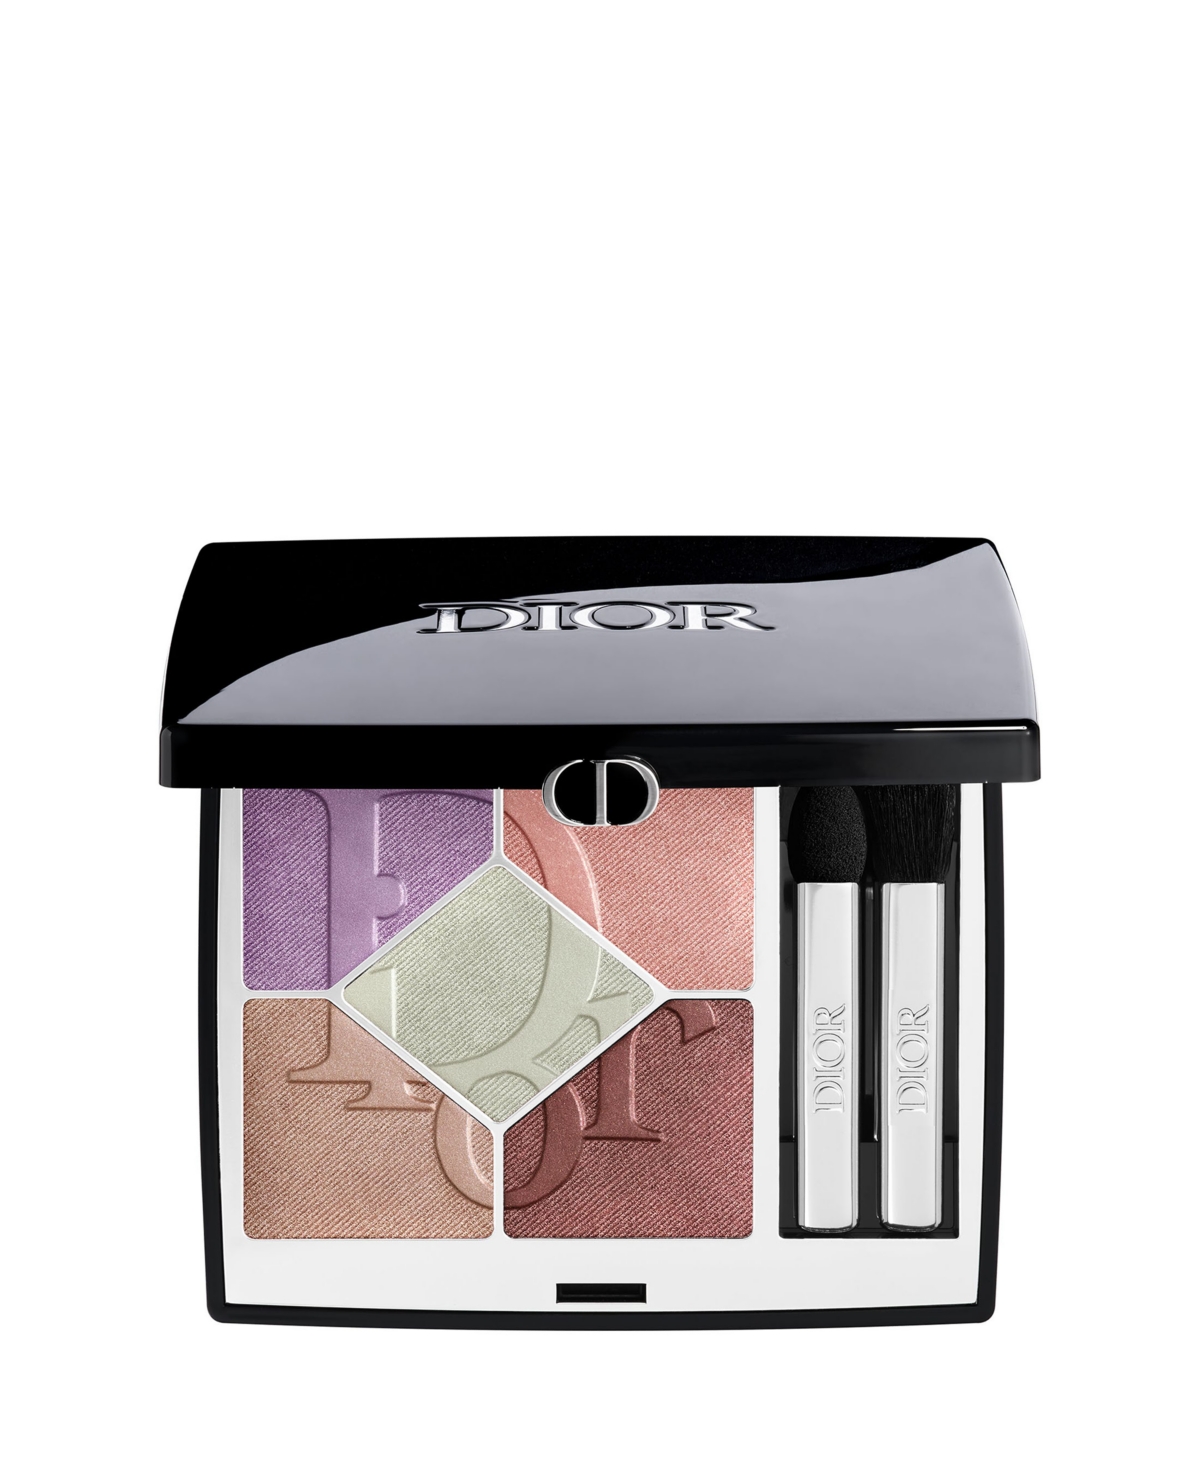 Limited-Edition Diorshow 5 Couleurs Eyeshadow Palette - Pastel Glow